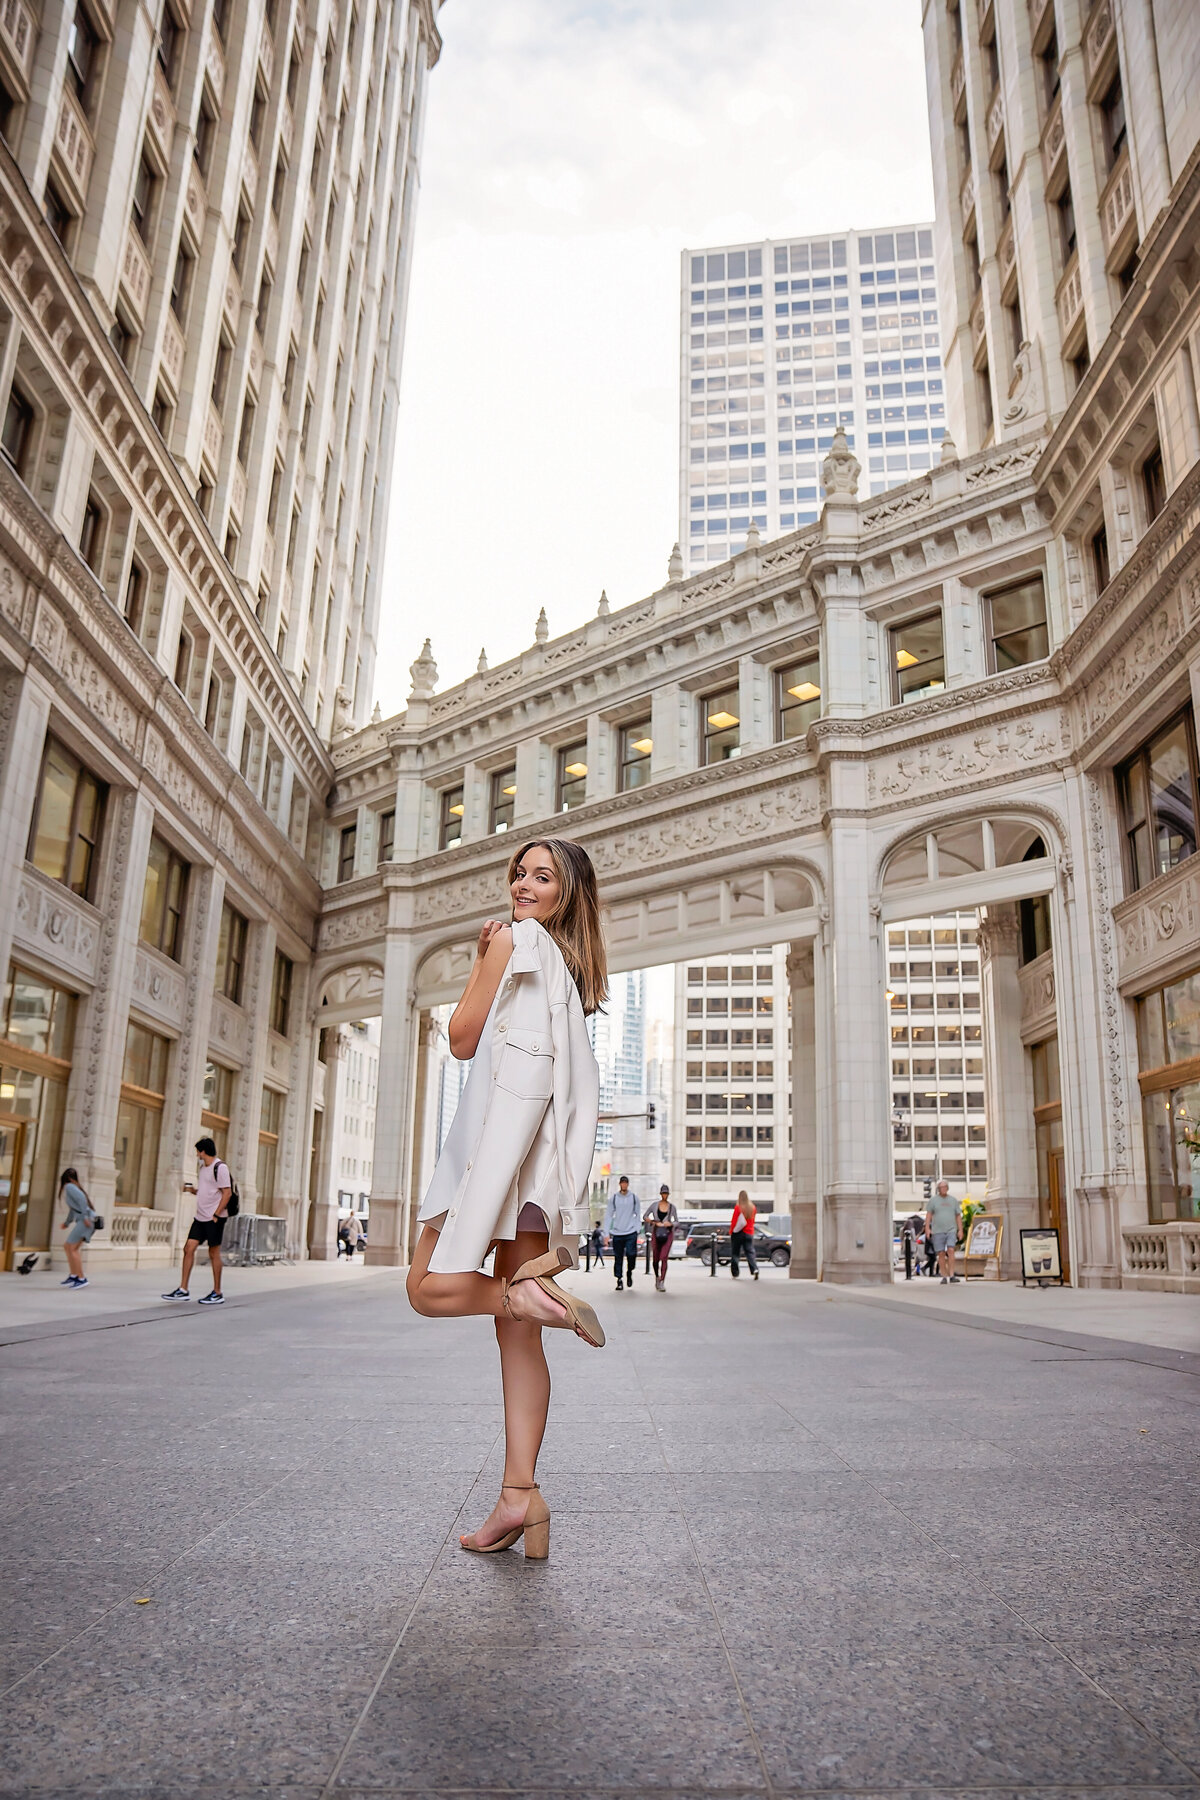 Beautiful Wrigley building in Chicago is perfect spot for photoshoots